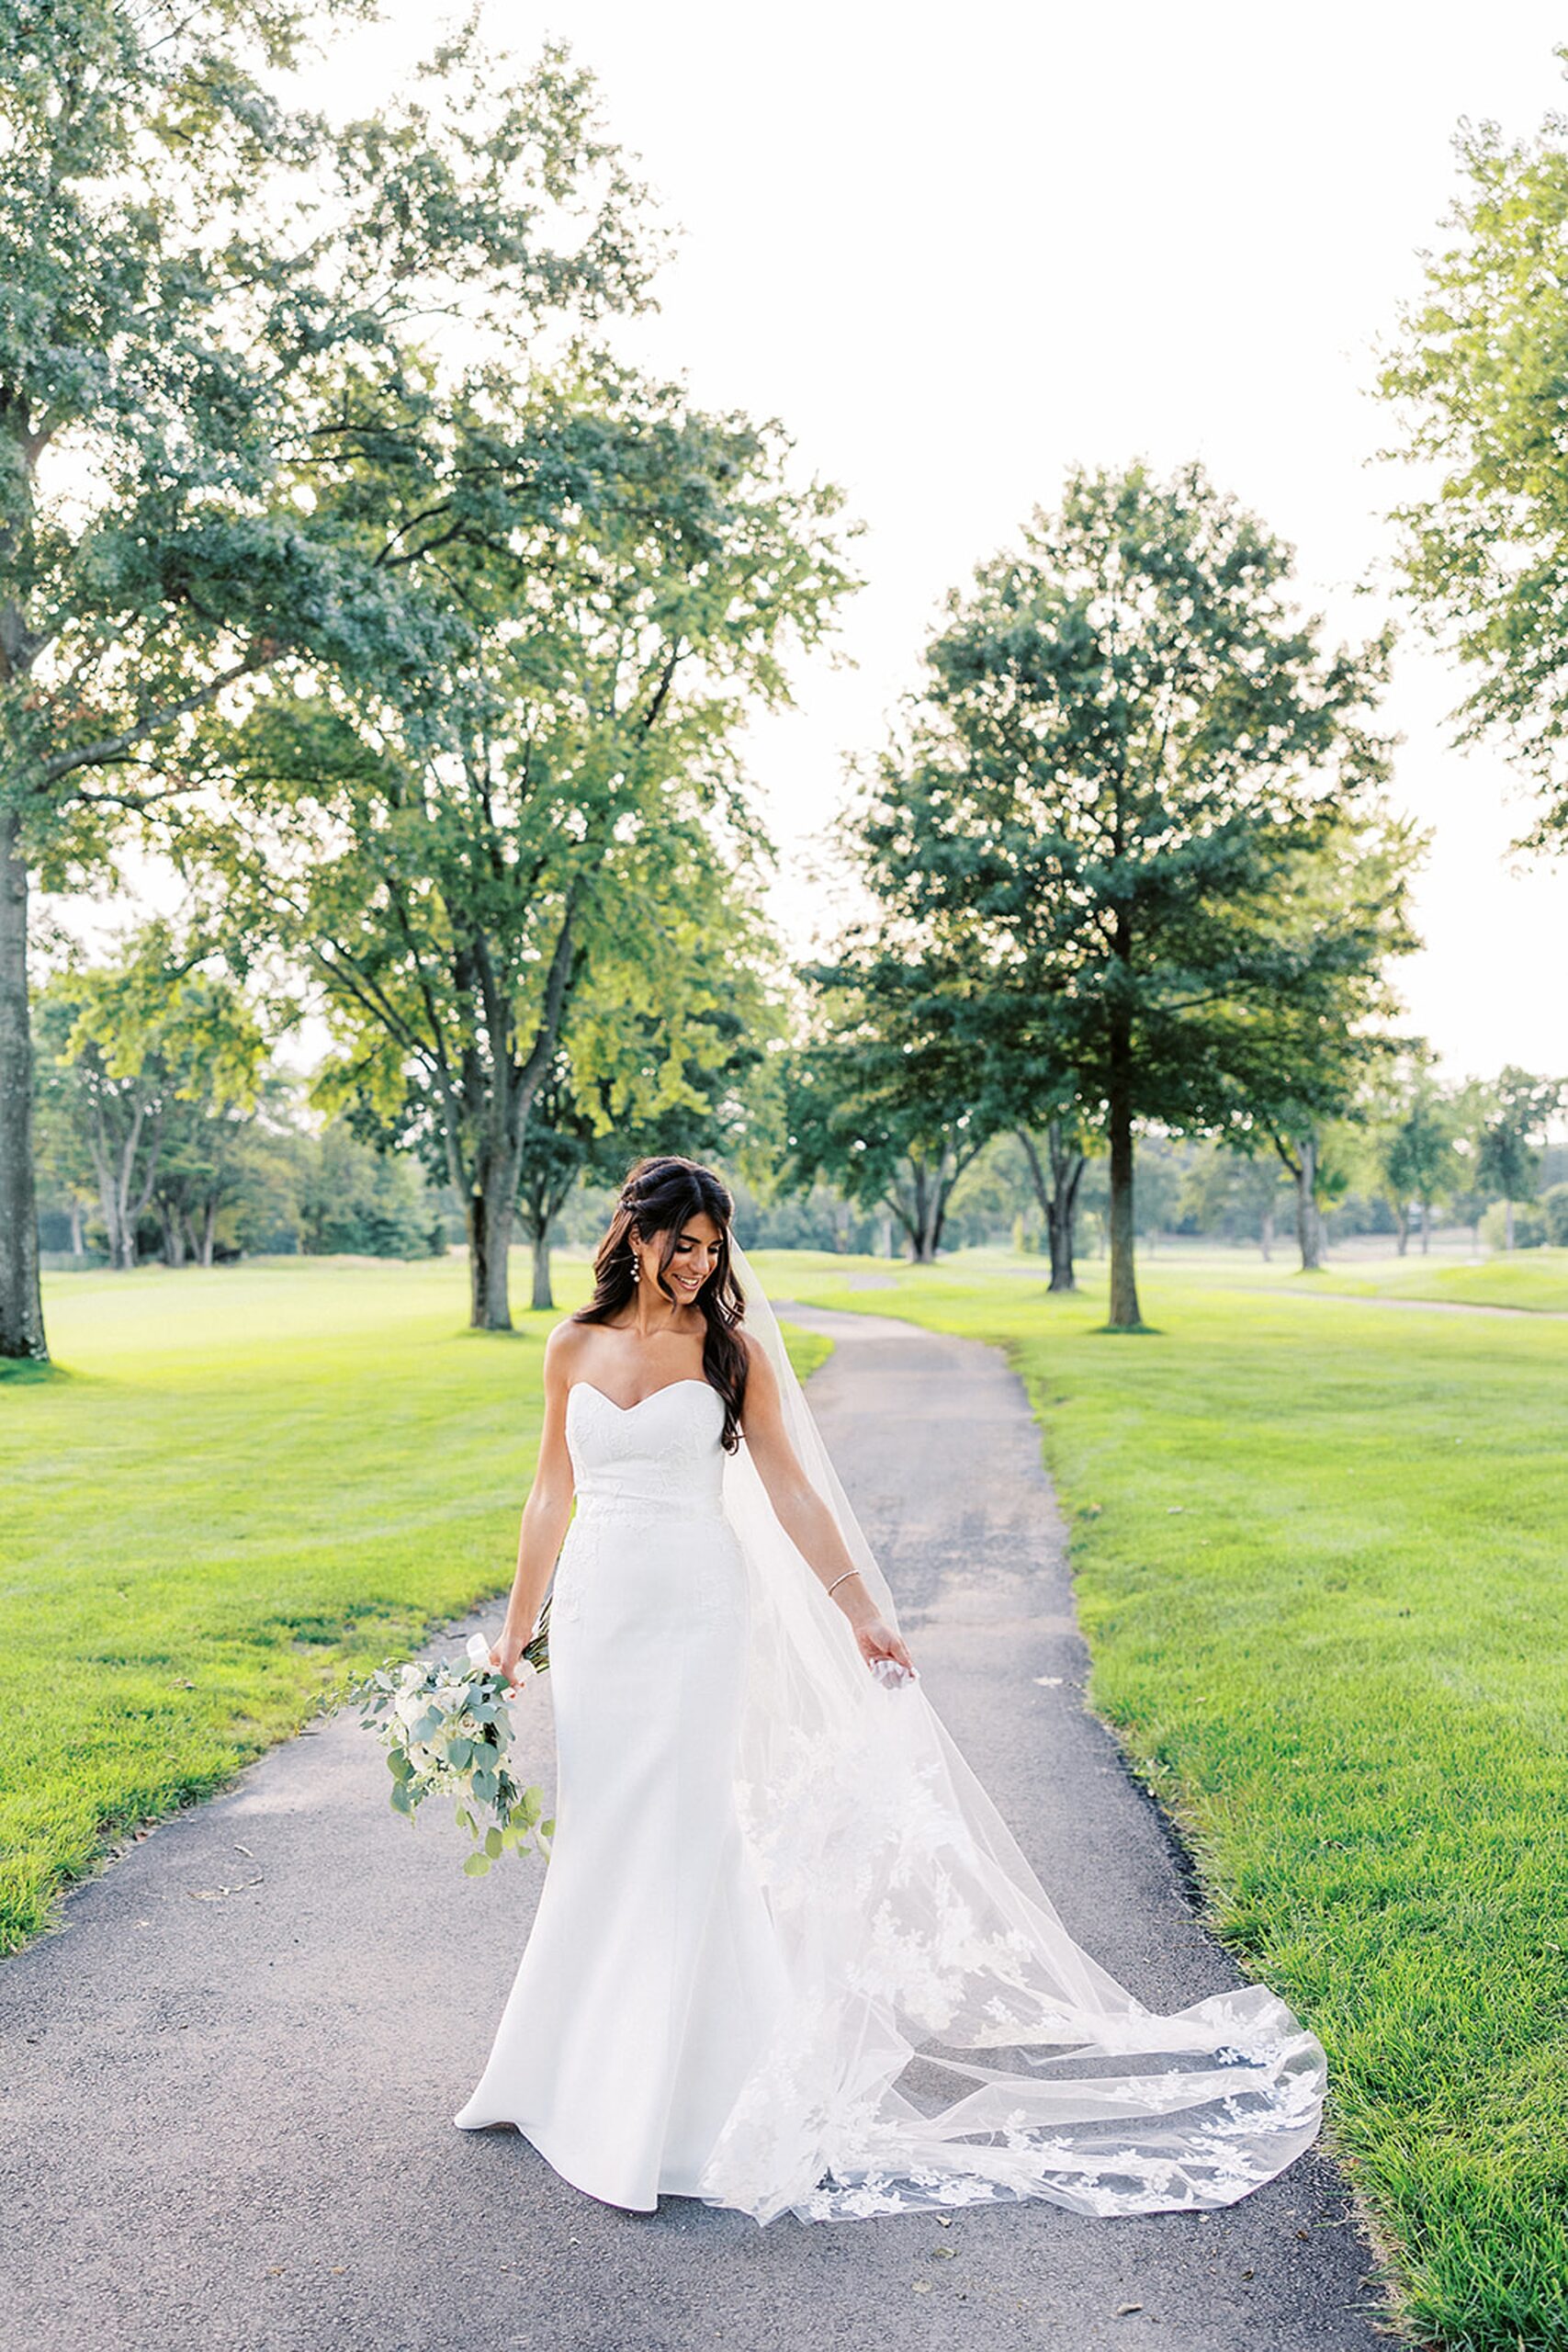 A bride plays with her ling veil and train in a golf course path at an edgewood country club wedding